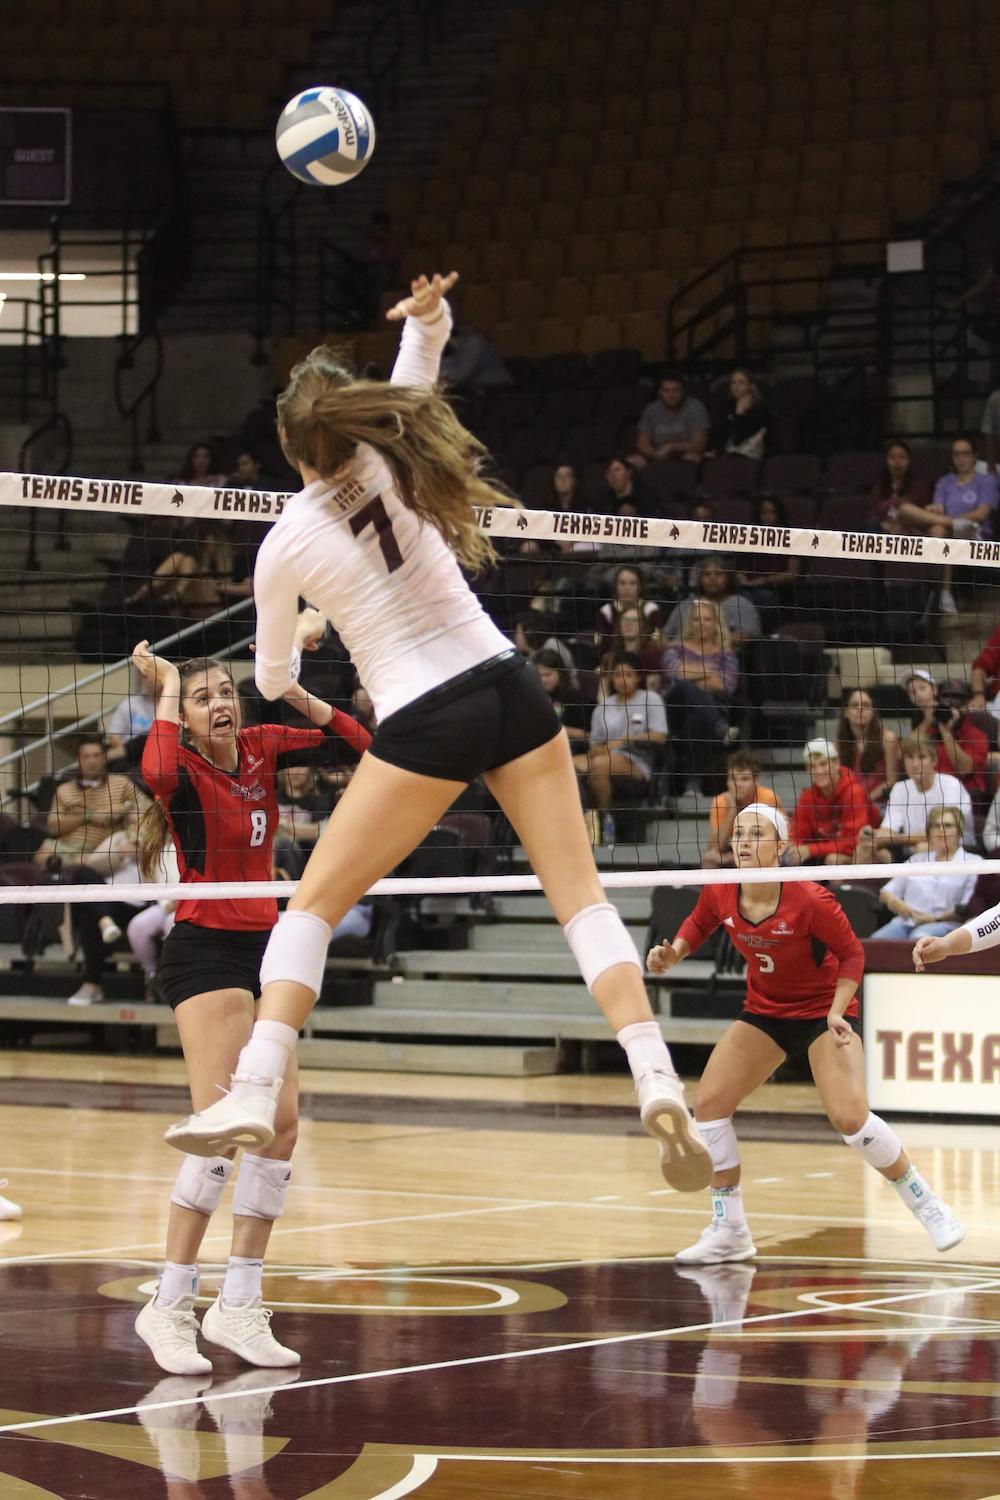 Texas+State+volleyball+remains+undefeated++in+conference+play